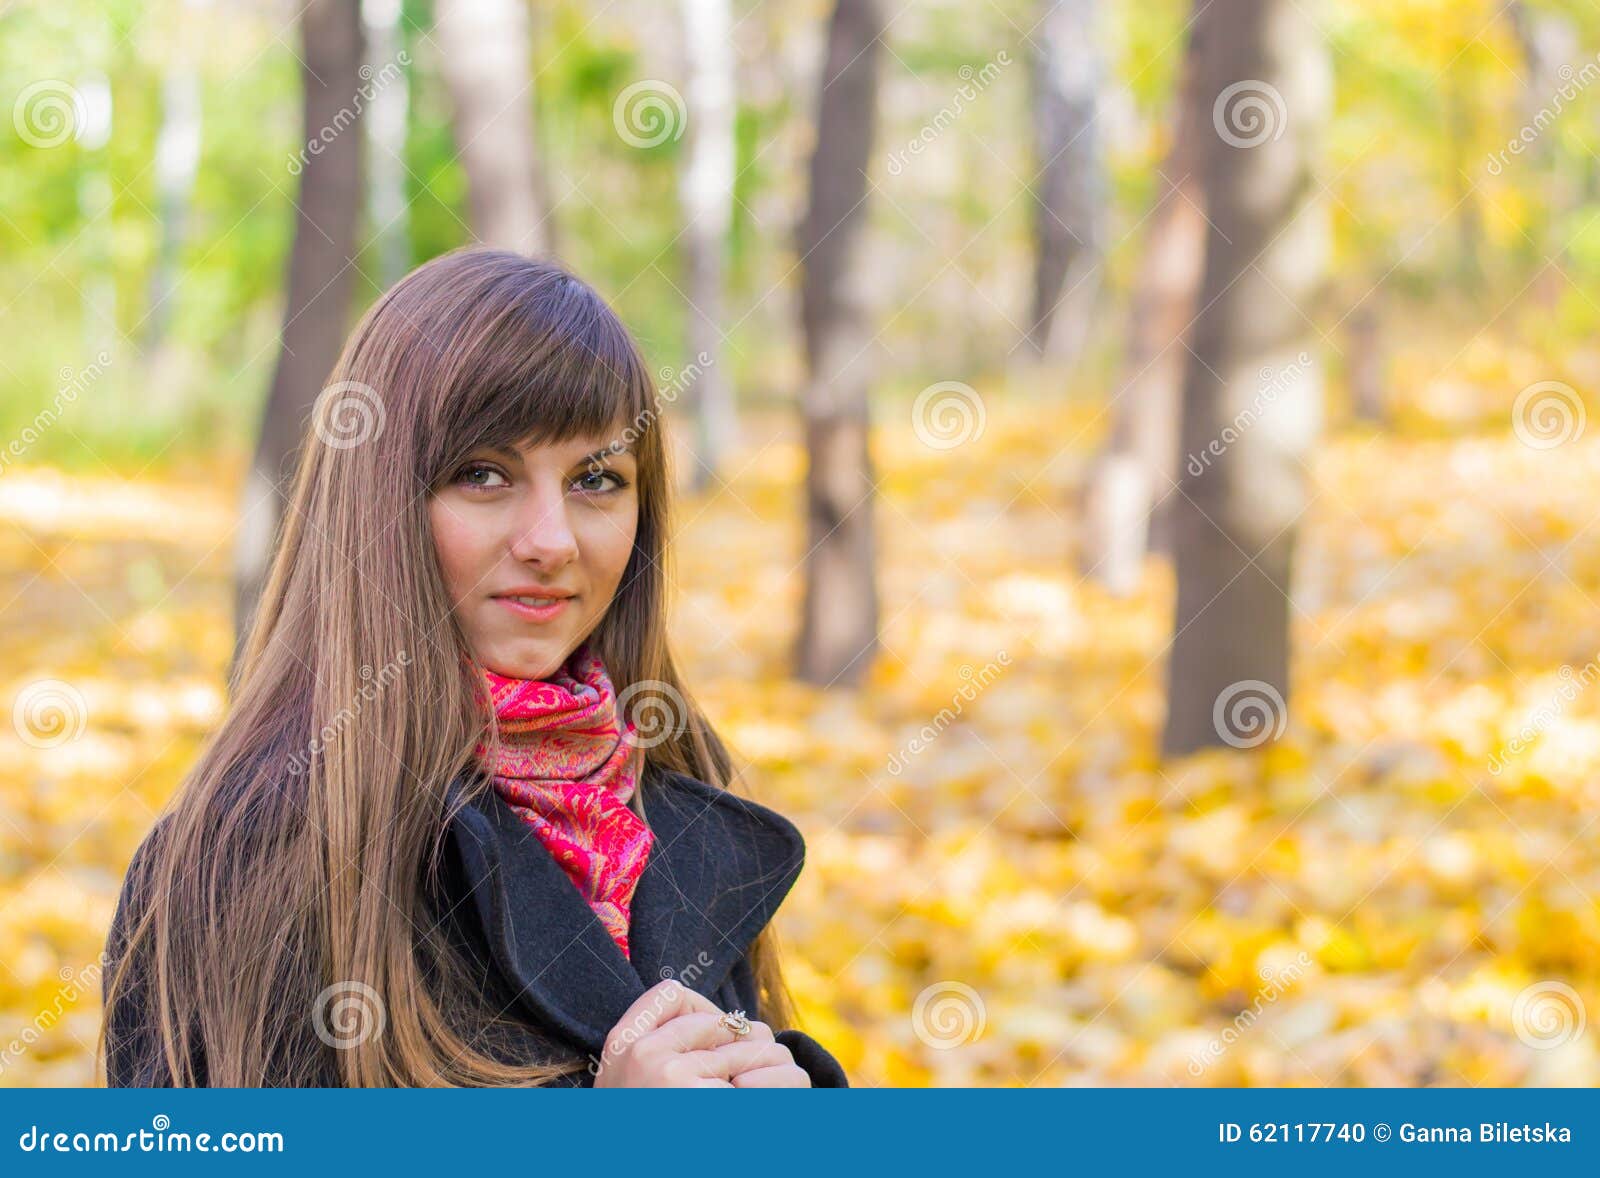 Beautiful Young Girl with Long Hair in Autumn Park with Multi-colored ...